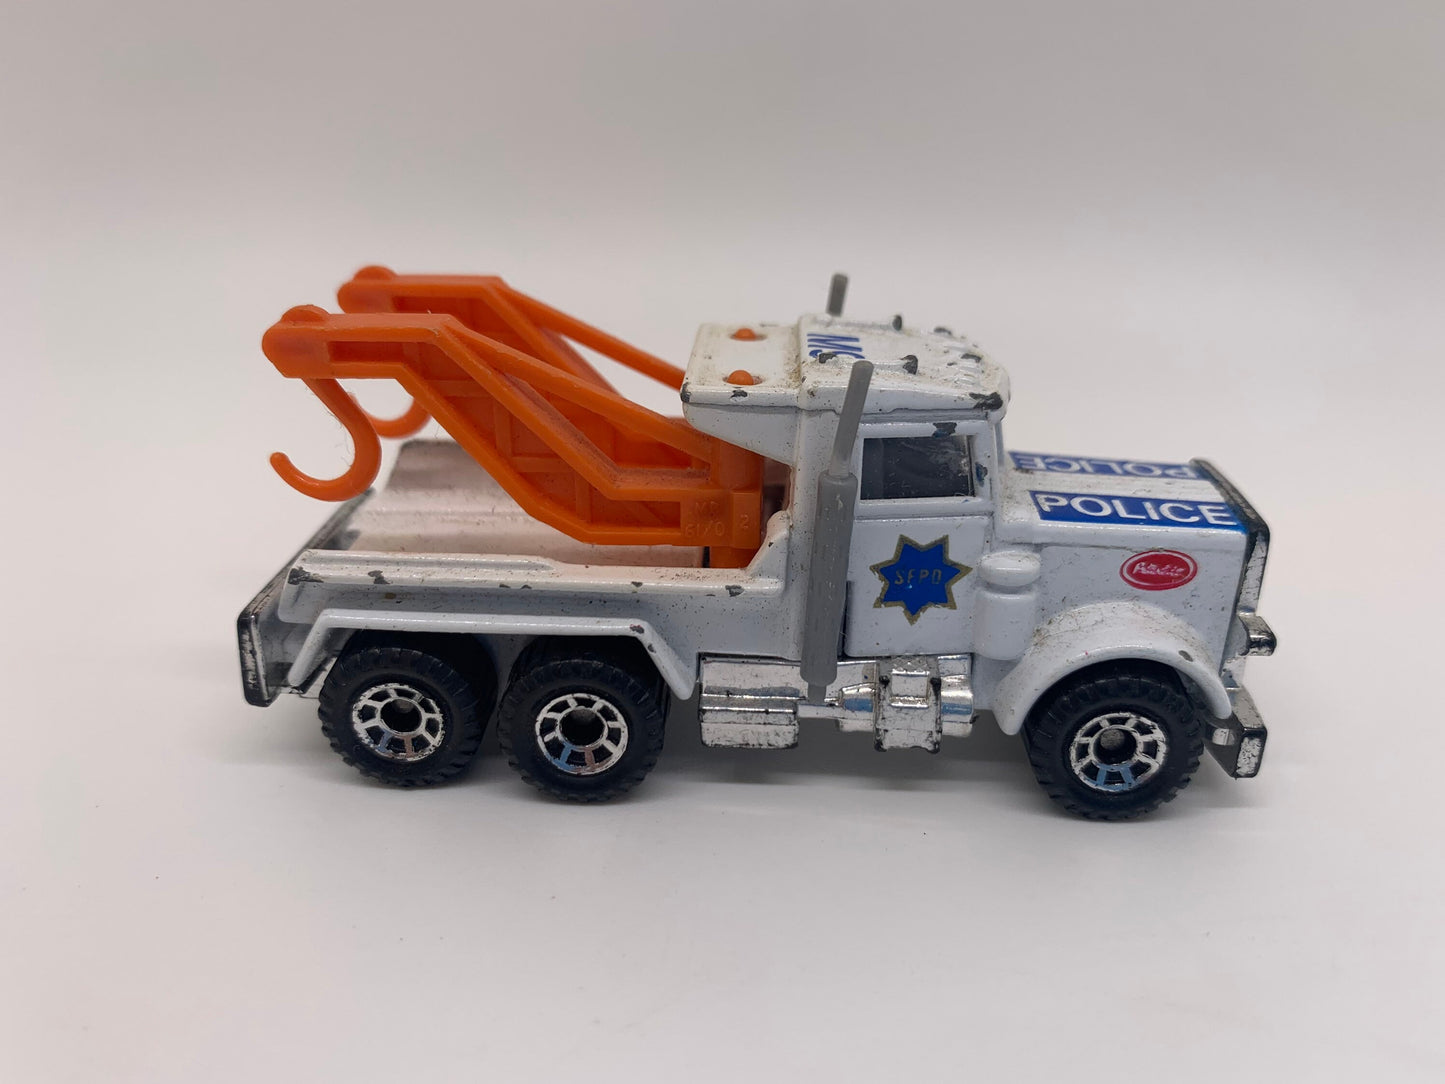 Matchbox Peterbilt Wreck Truck Police M9 White Perfect Birthday Gift Miniature Collectable Scale Model Toy Car